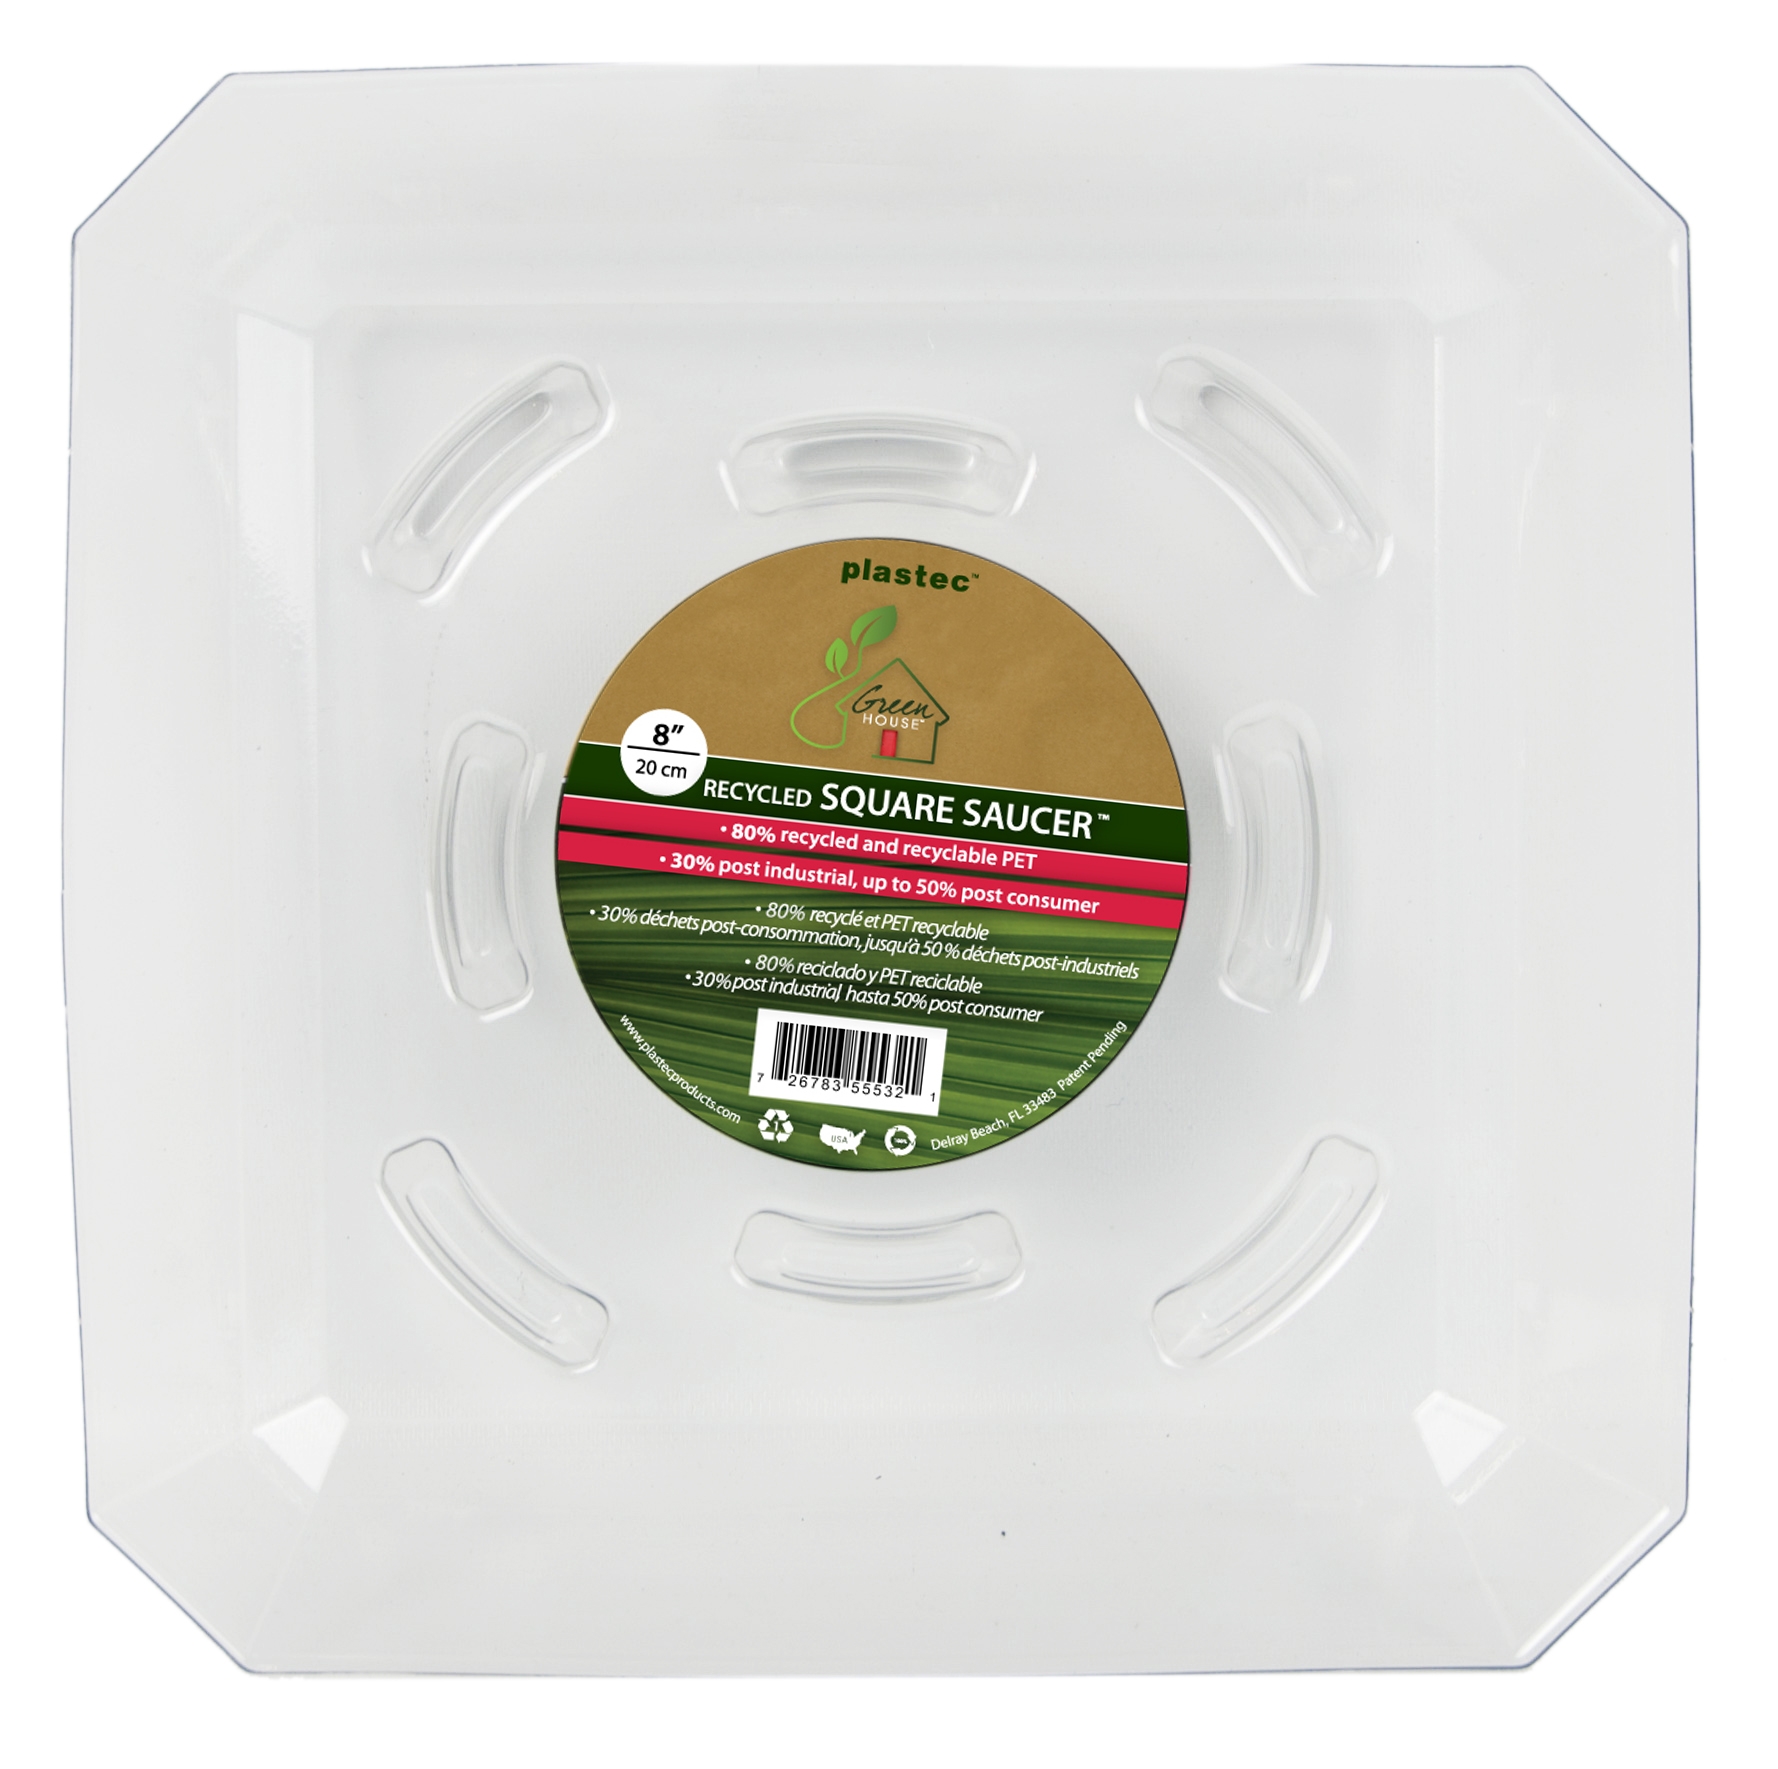 Plastec FGR16 Floor Guard Recycled Saucer 16-Inch